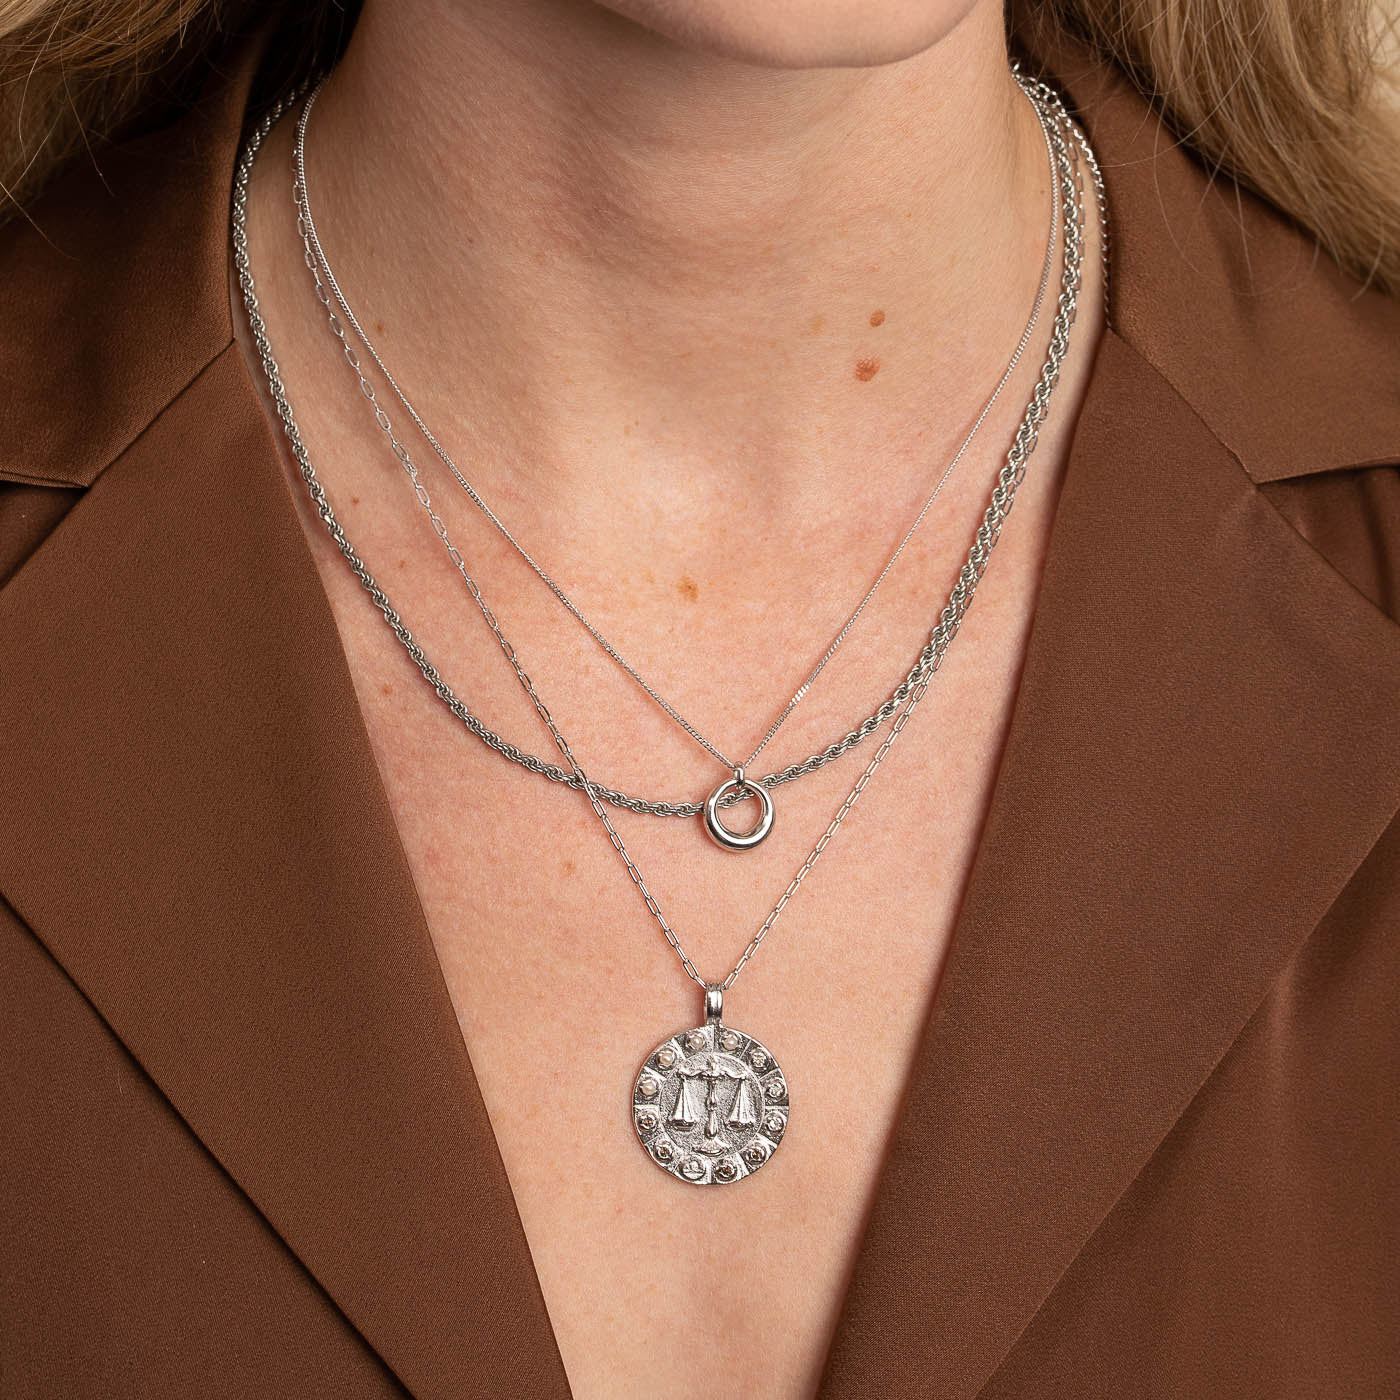 Libra Bold Zodiac Pendant Necklace in Silver worn layered with necklaces